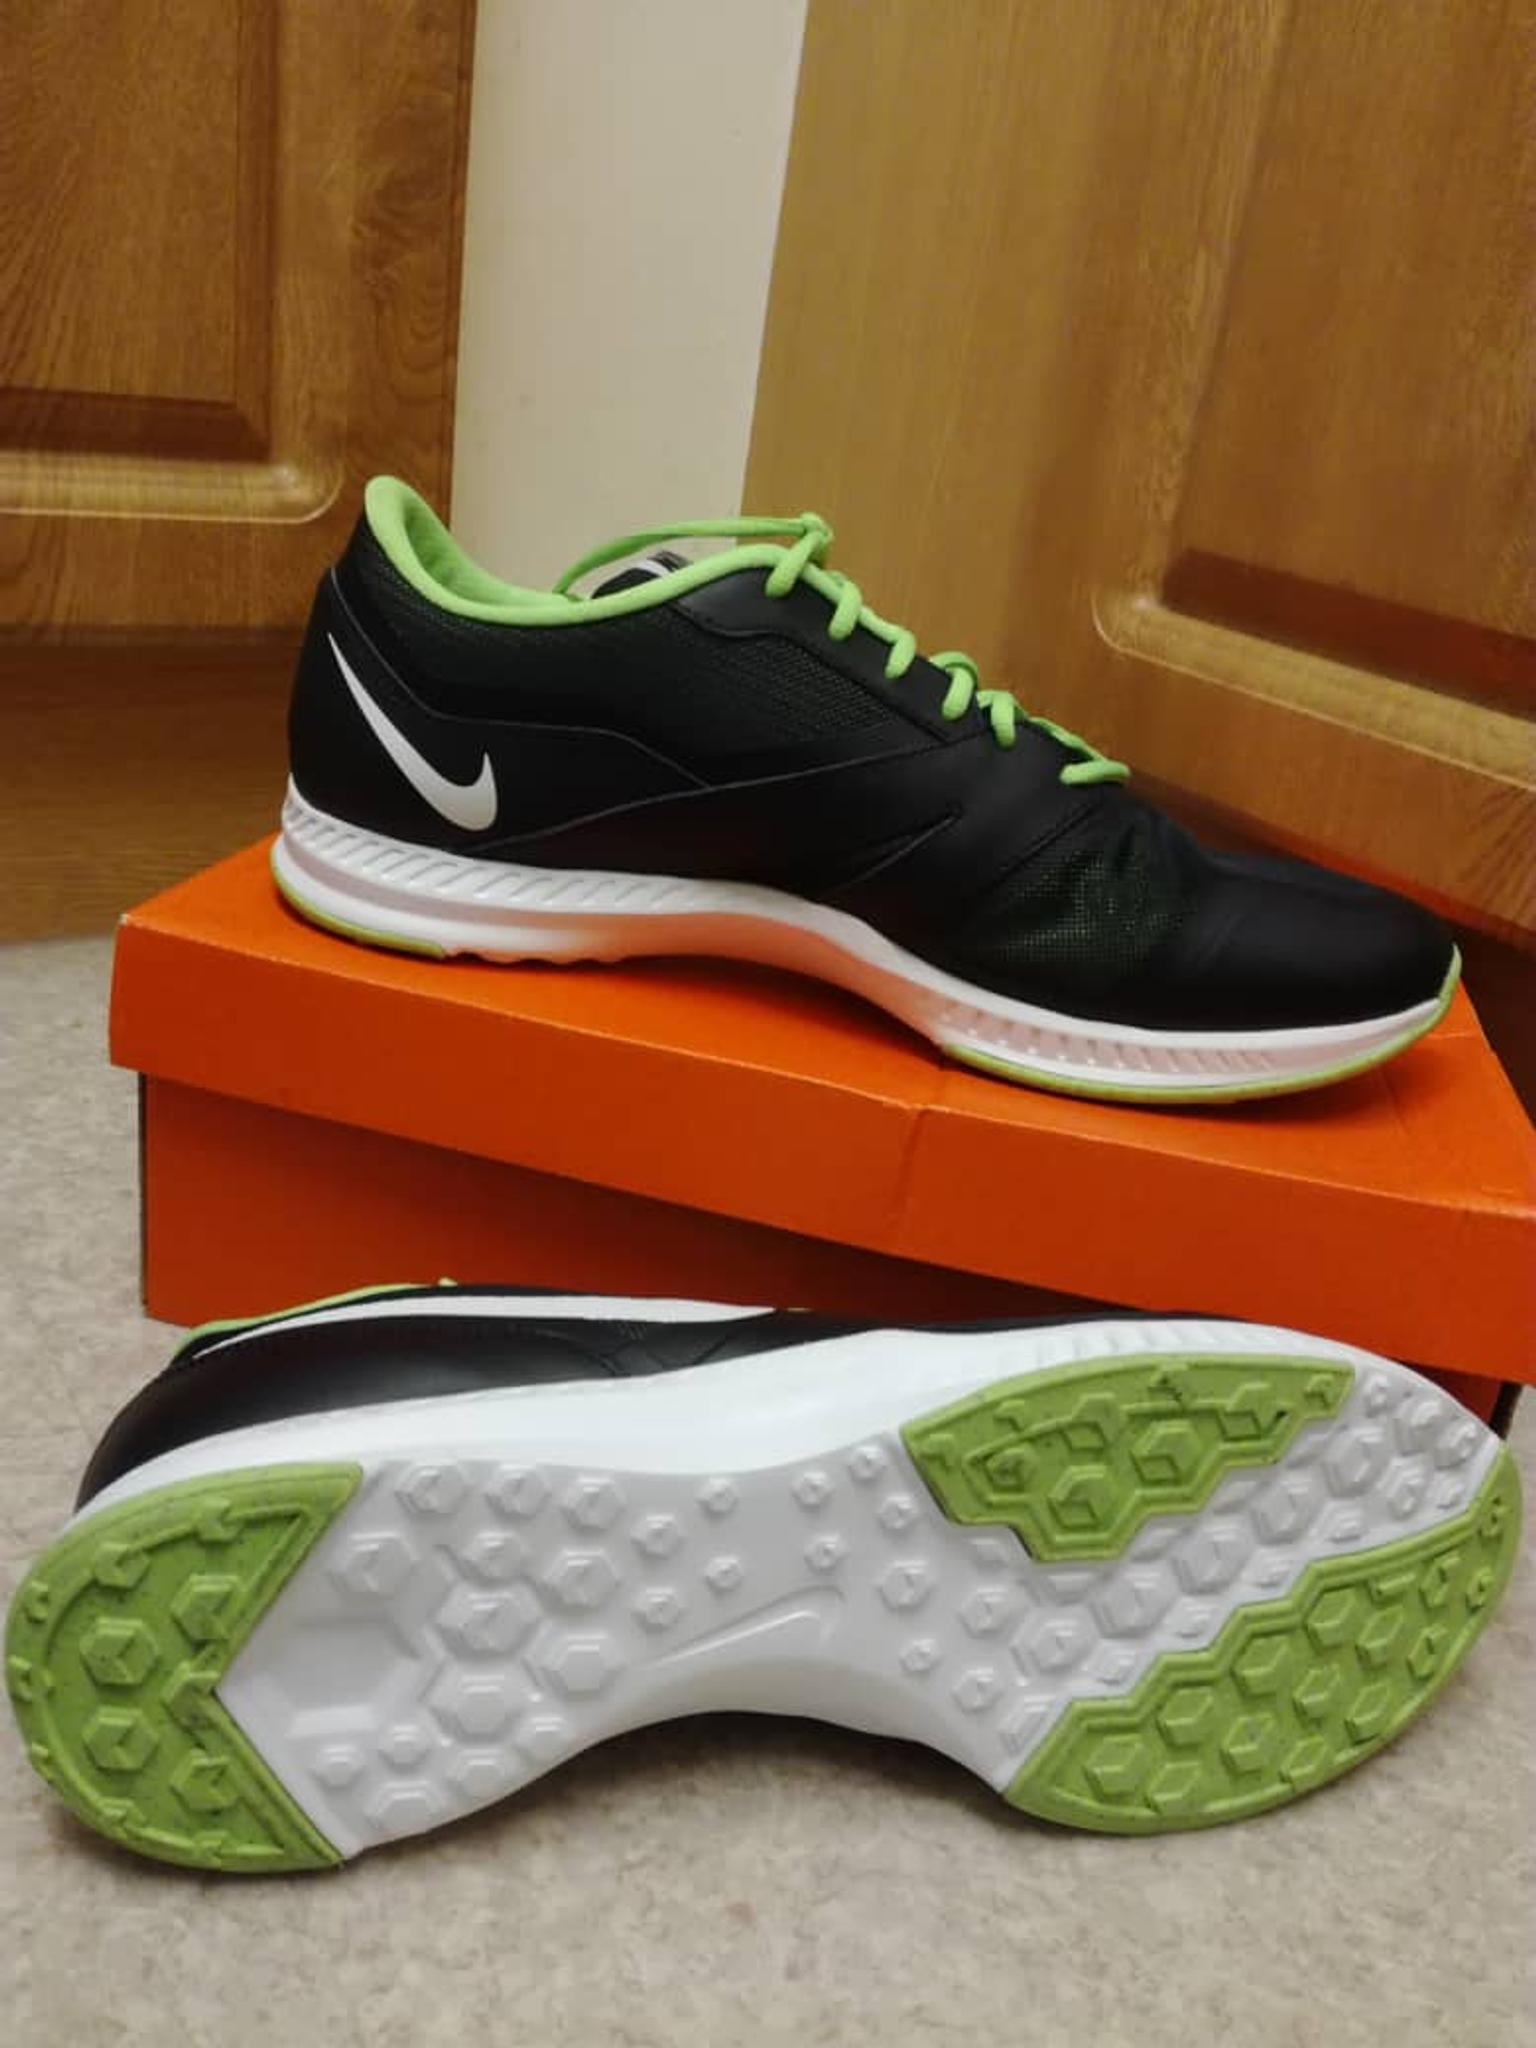 Nike Trainers Brand New Mens - Size 14 